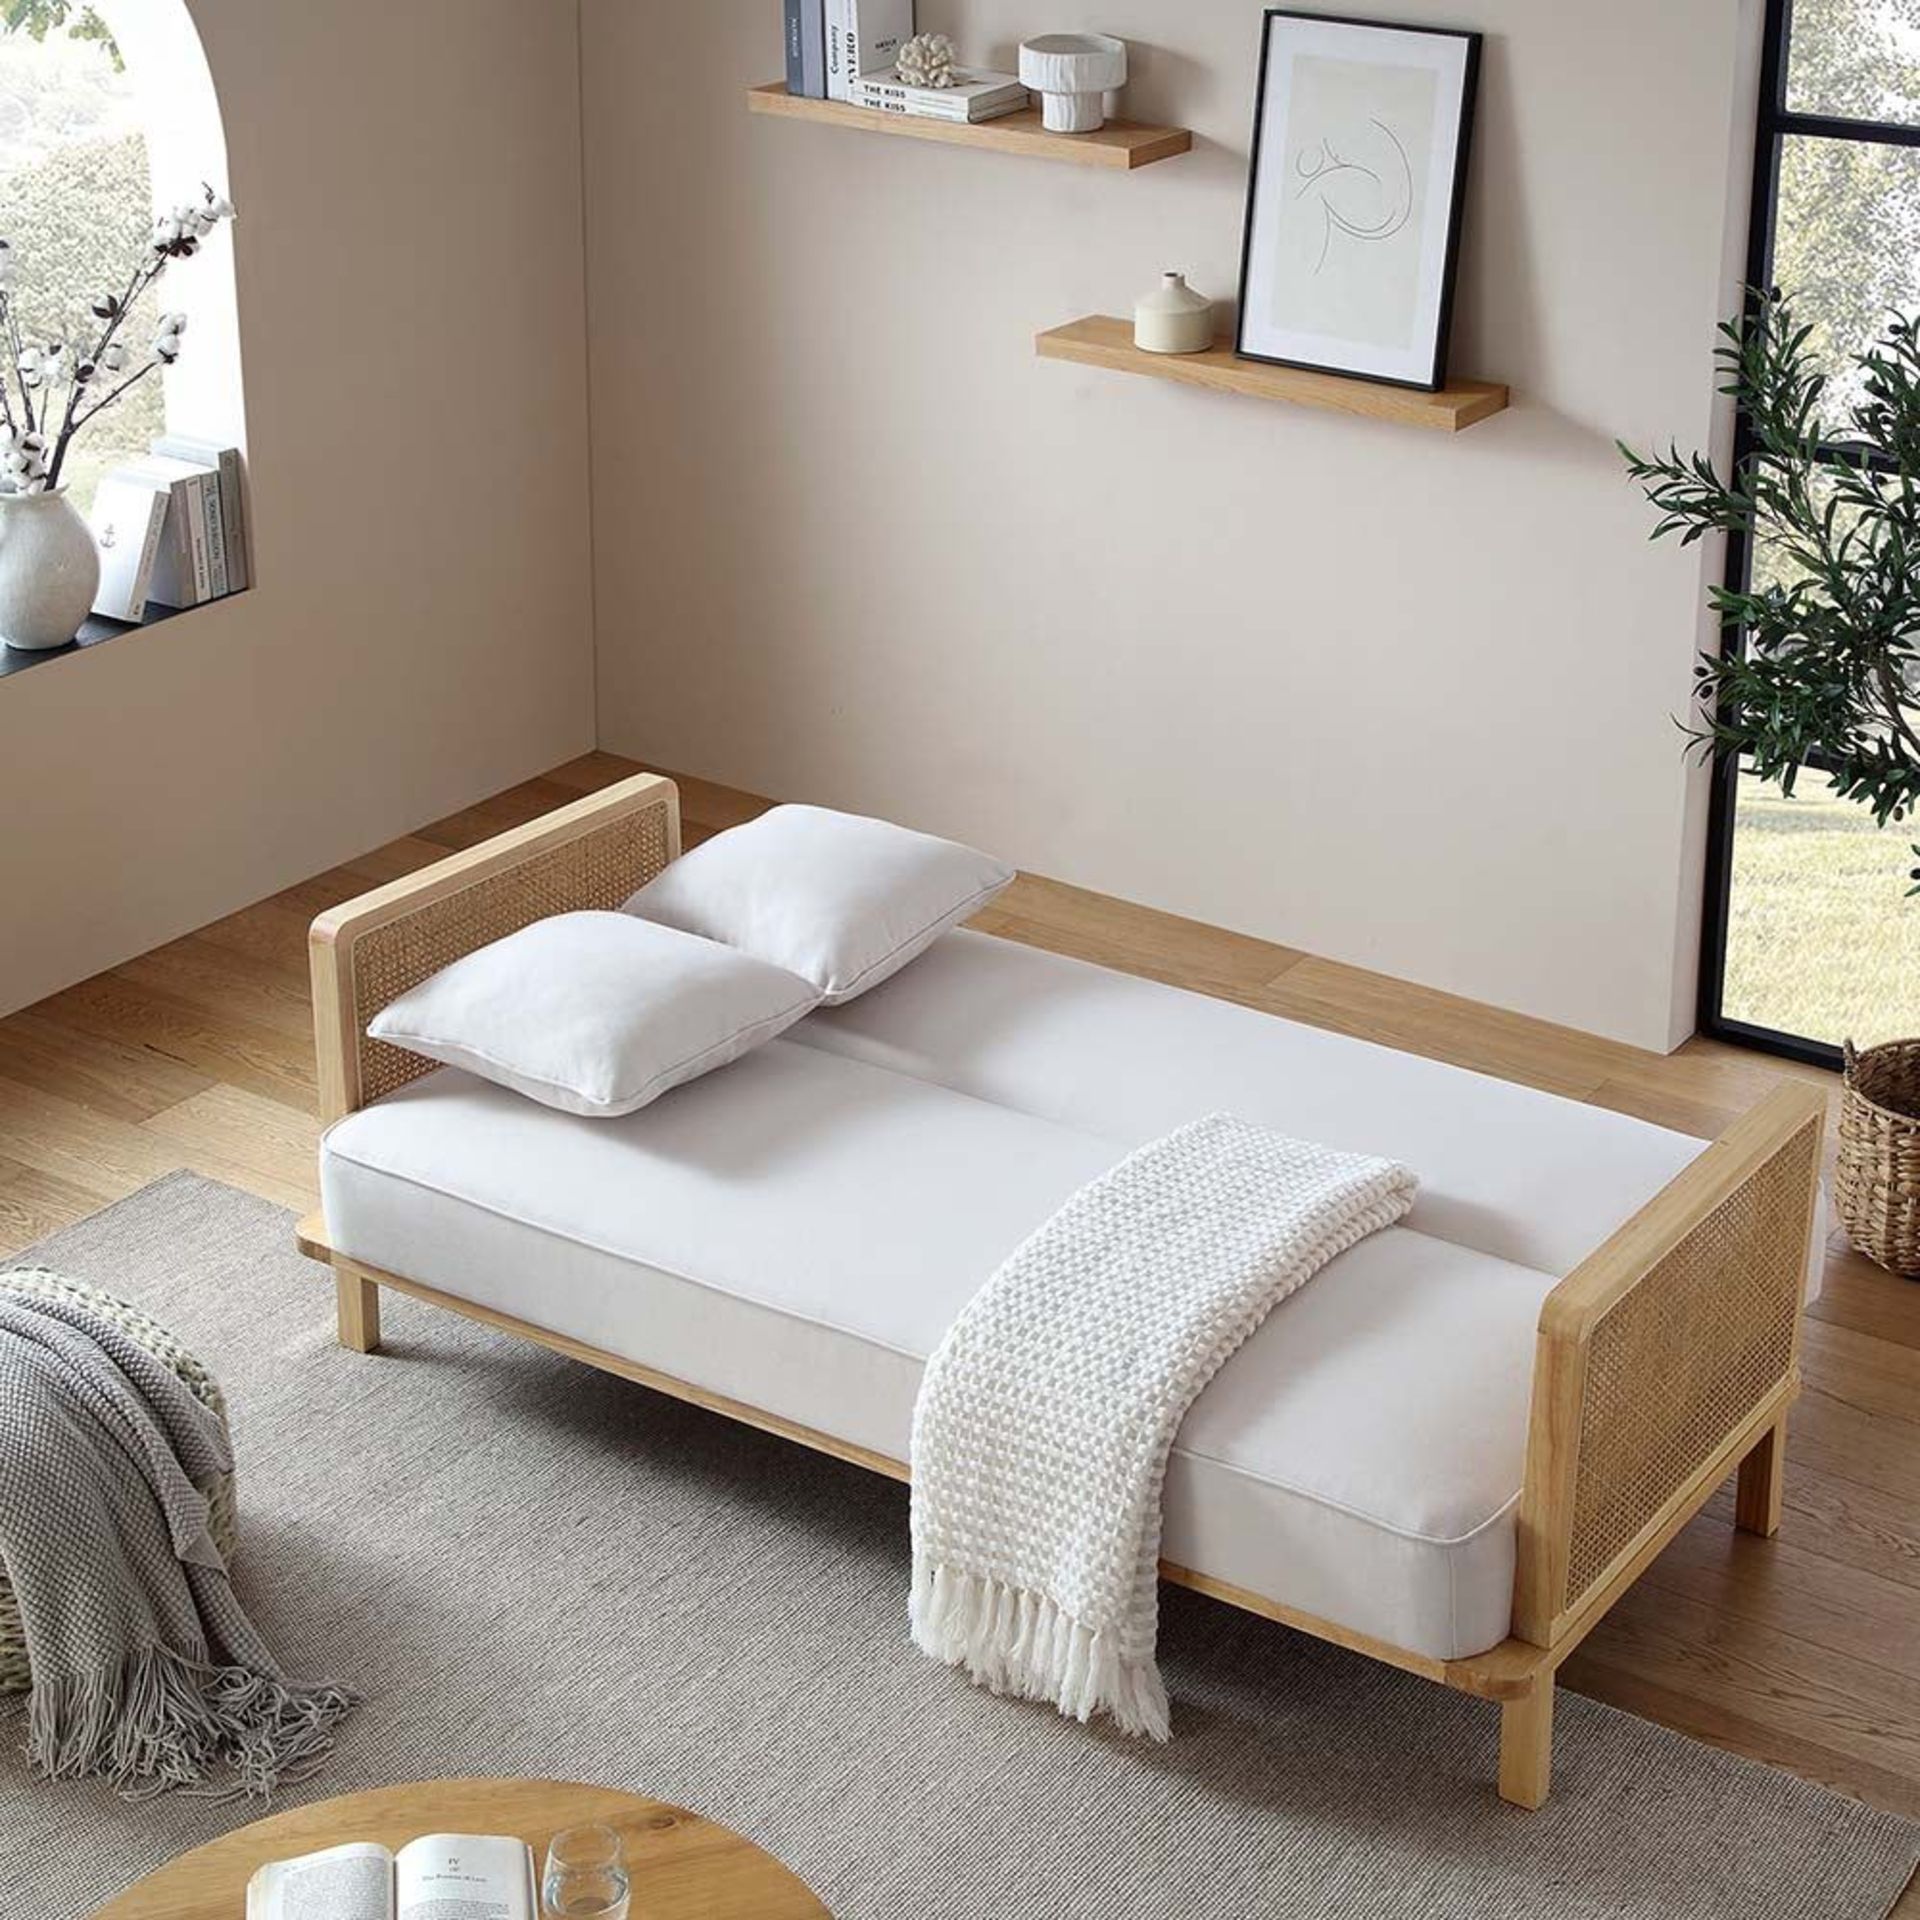 Pienza Cane Sofa Bed, Beige Woven Fabric with Natural Frame. - R14. RRP £649.99. Upholstered in soft - Bild 2 aus 2